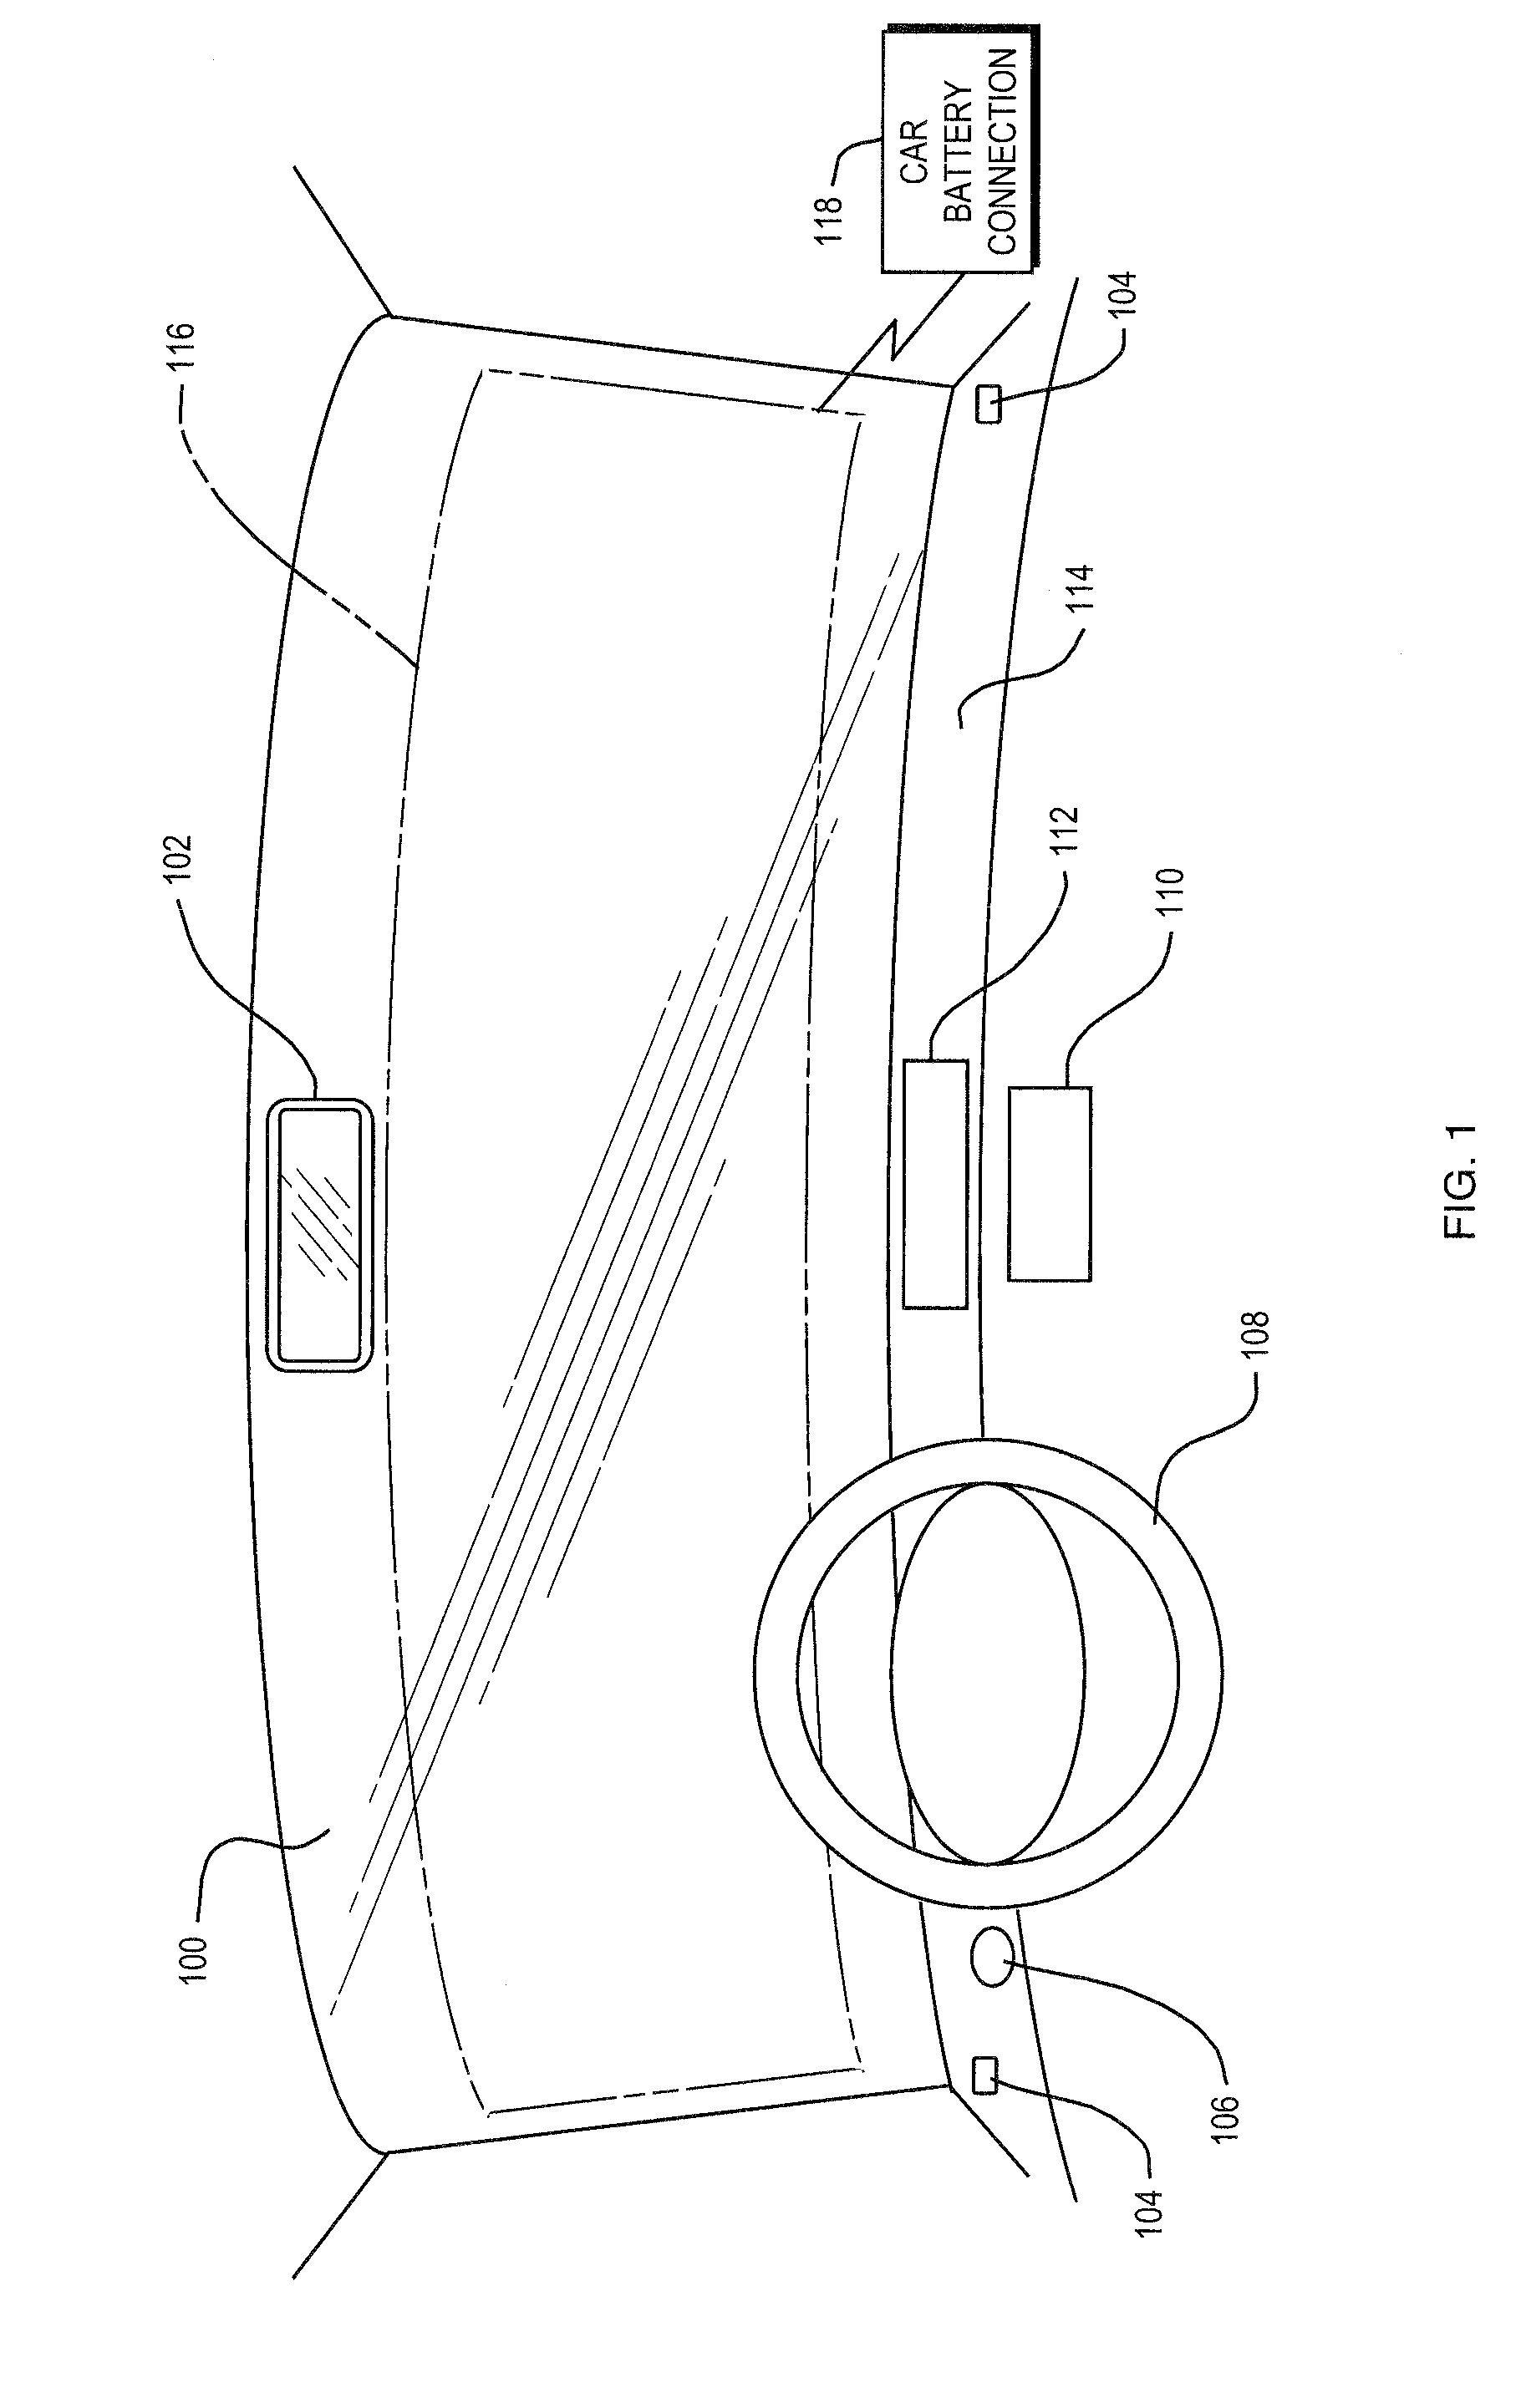 Digital Windshield Information System Employing a Recommendation Engine Keyed to a Map Database System